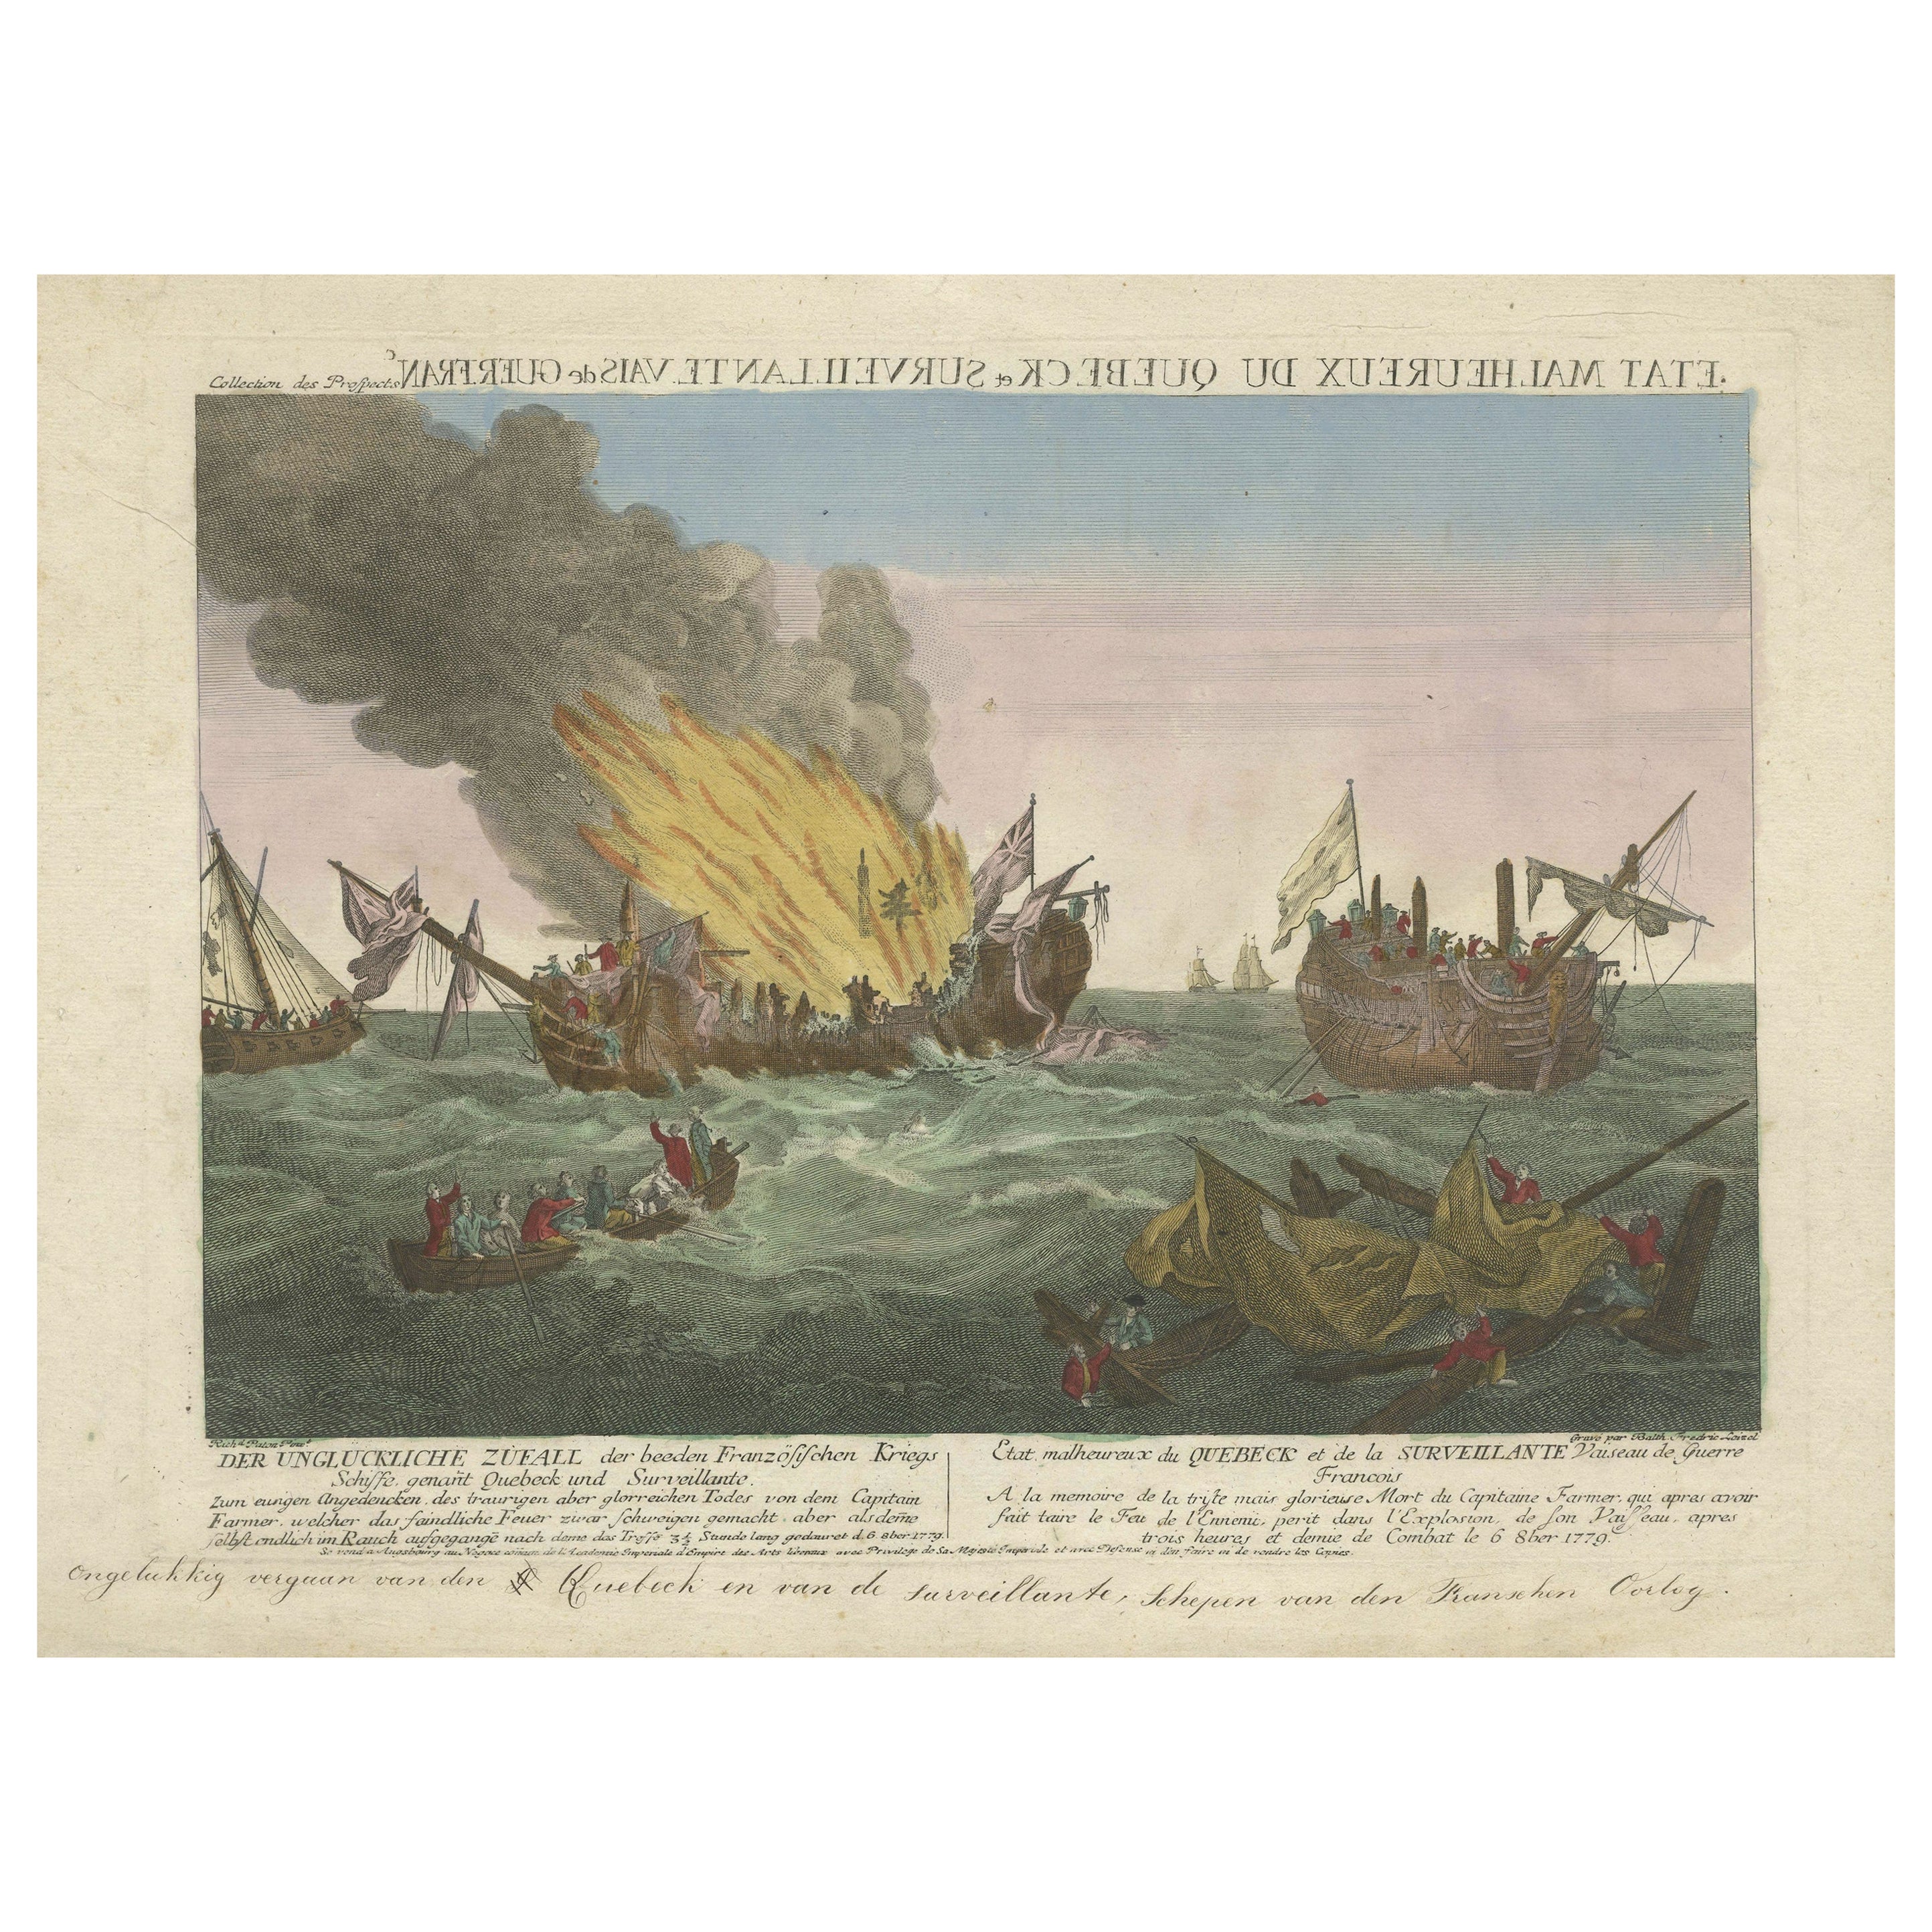 Rare Engraving of a Famous Battle Near Ushant Between the French and British